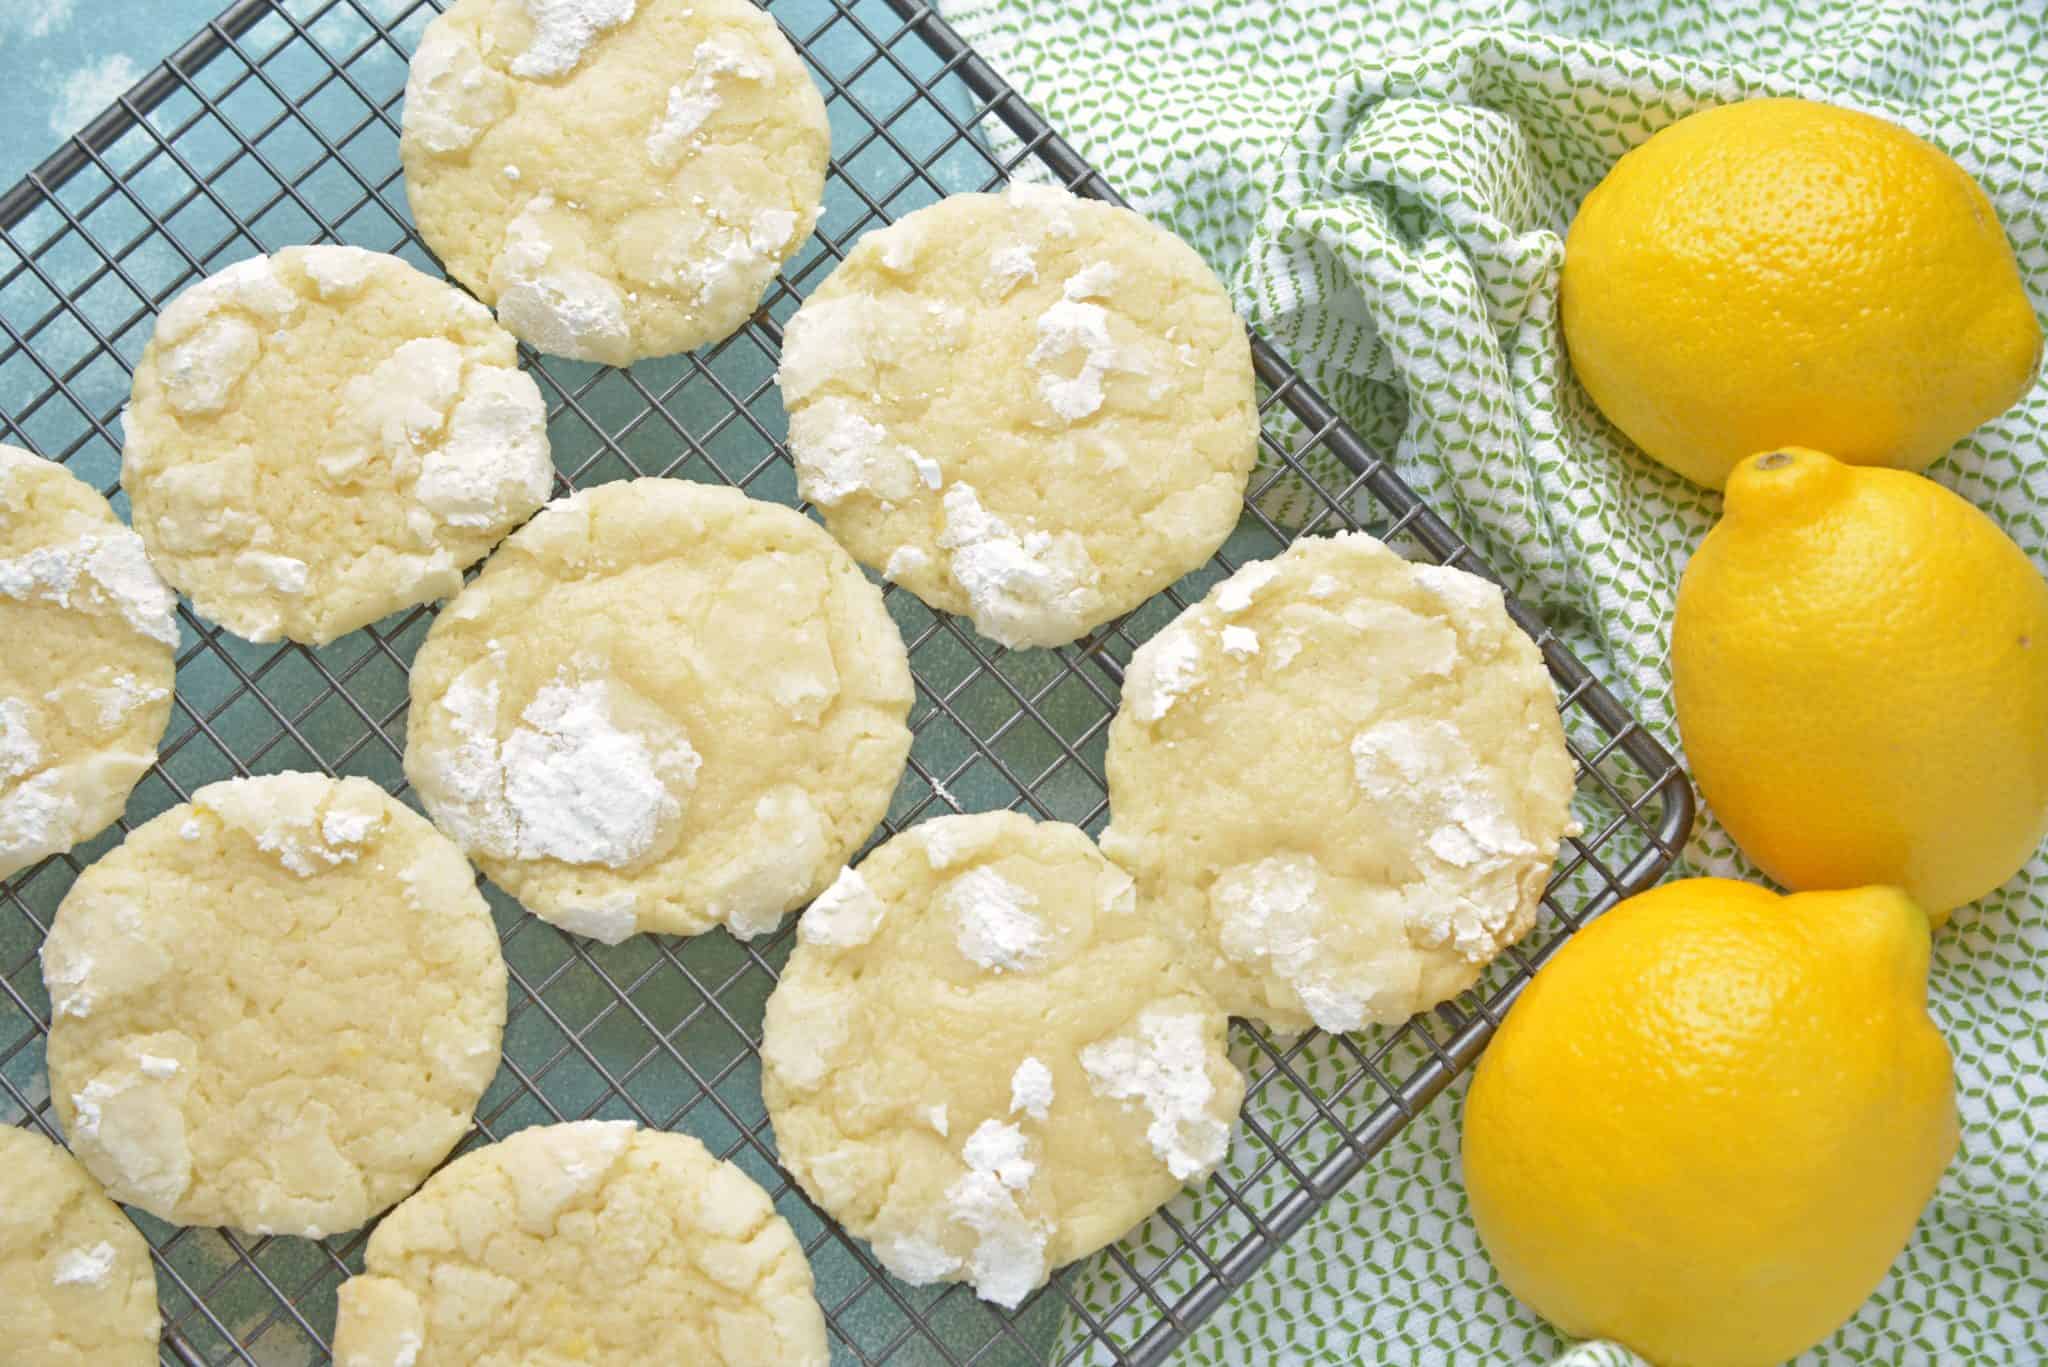 Lemon Cooler Cookies, also known as Sunshine Lemon Coolers, are a classic cookie recipe using fresh lemon and an easy cookie dough. #lemoncoolercookies #lemoncoolers #lemoncookies www.savoryexperiments.com 